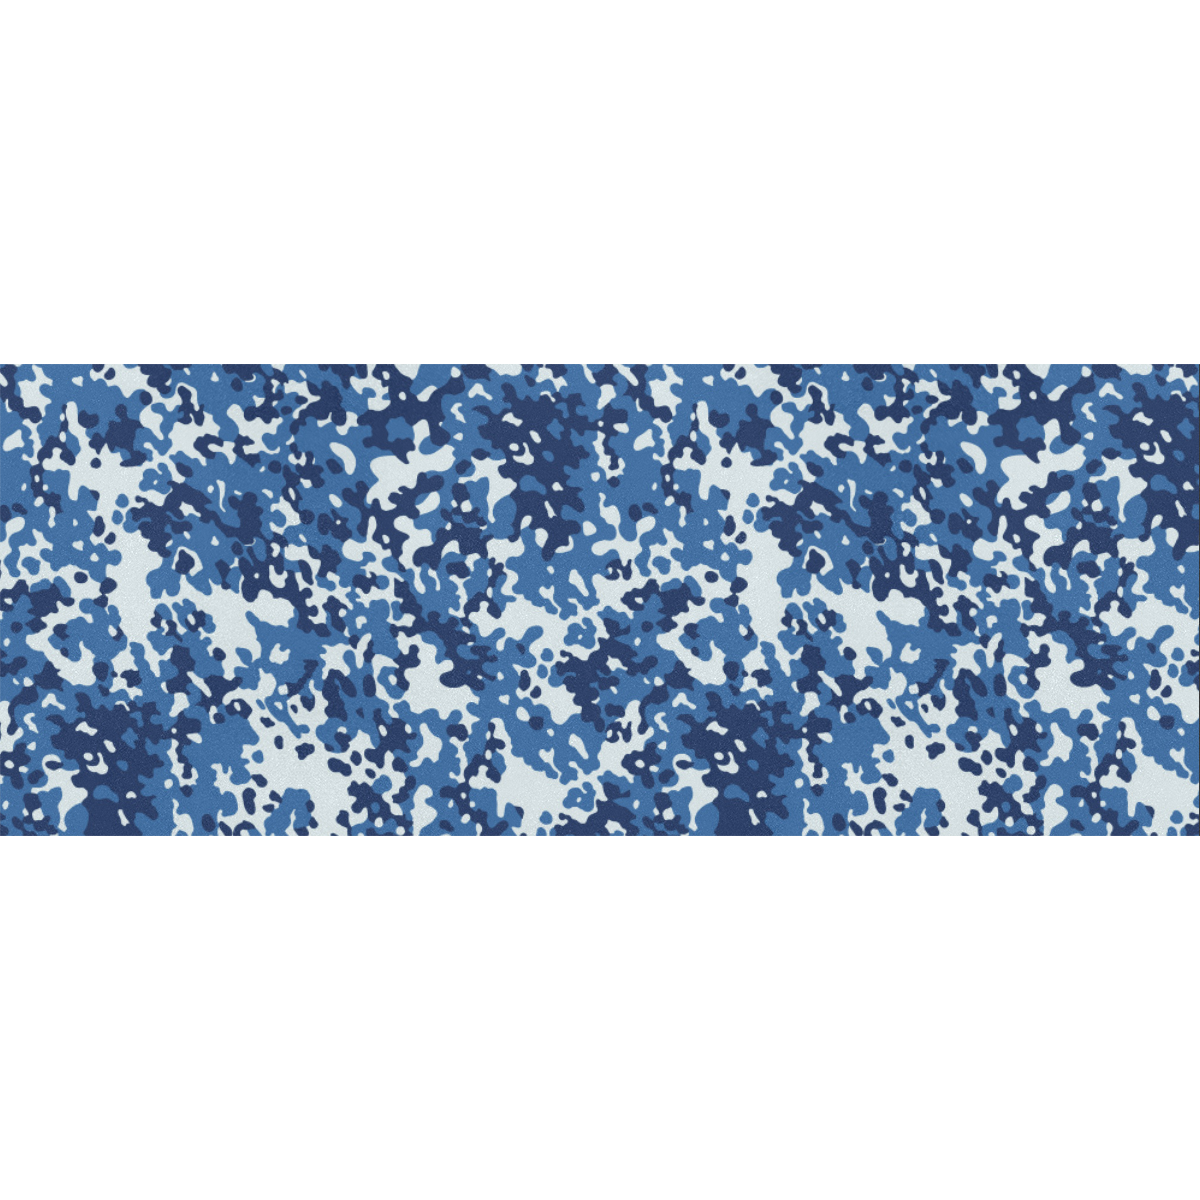 Digital Blue Camouflage Gift Wrapping Paper 58"x 23" (1 Roll)